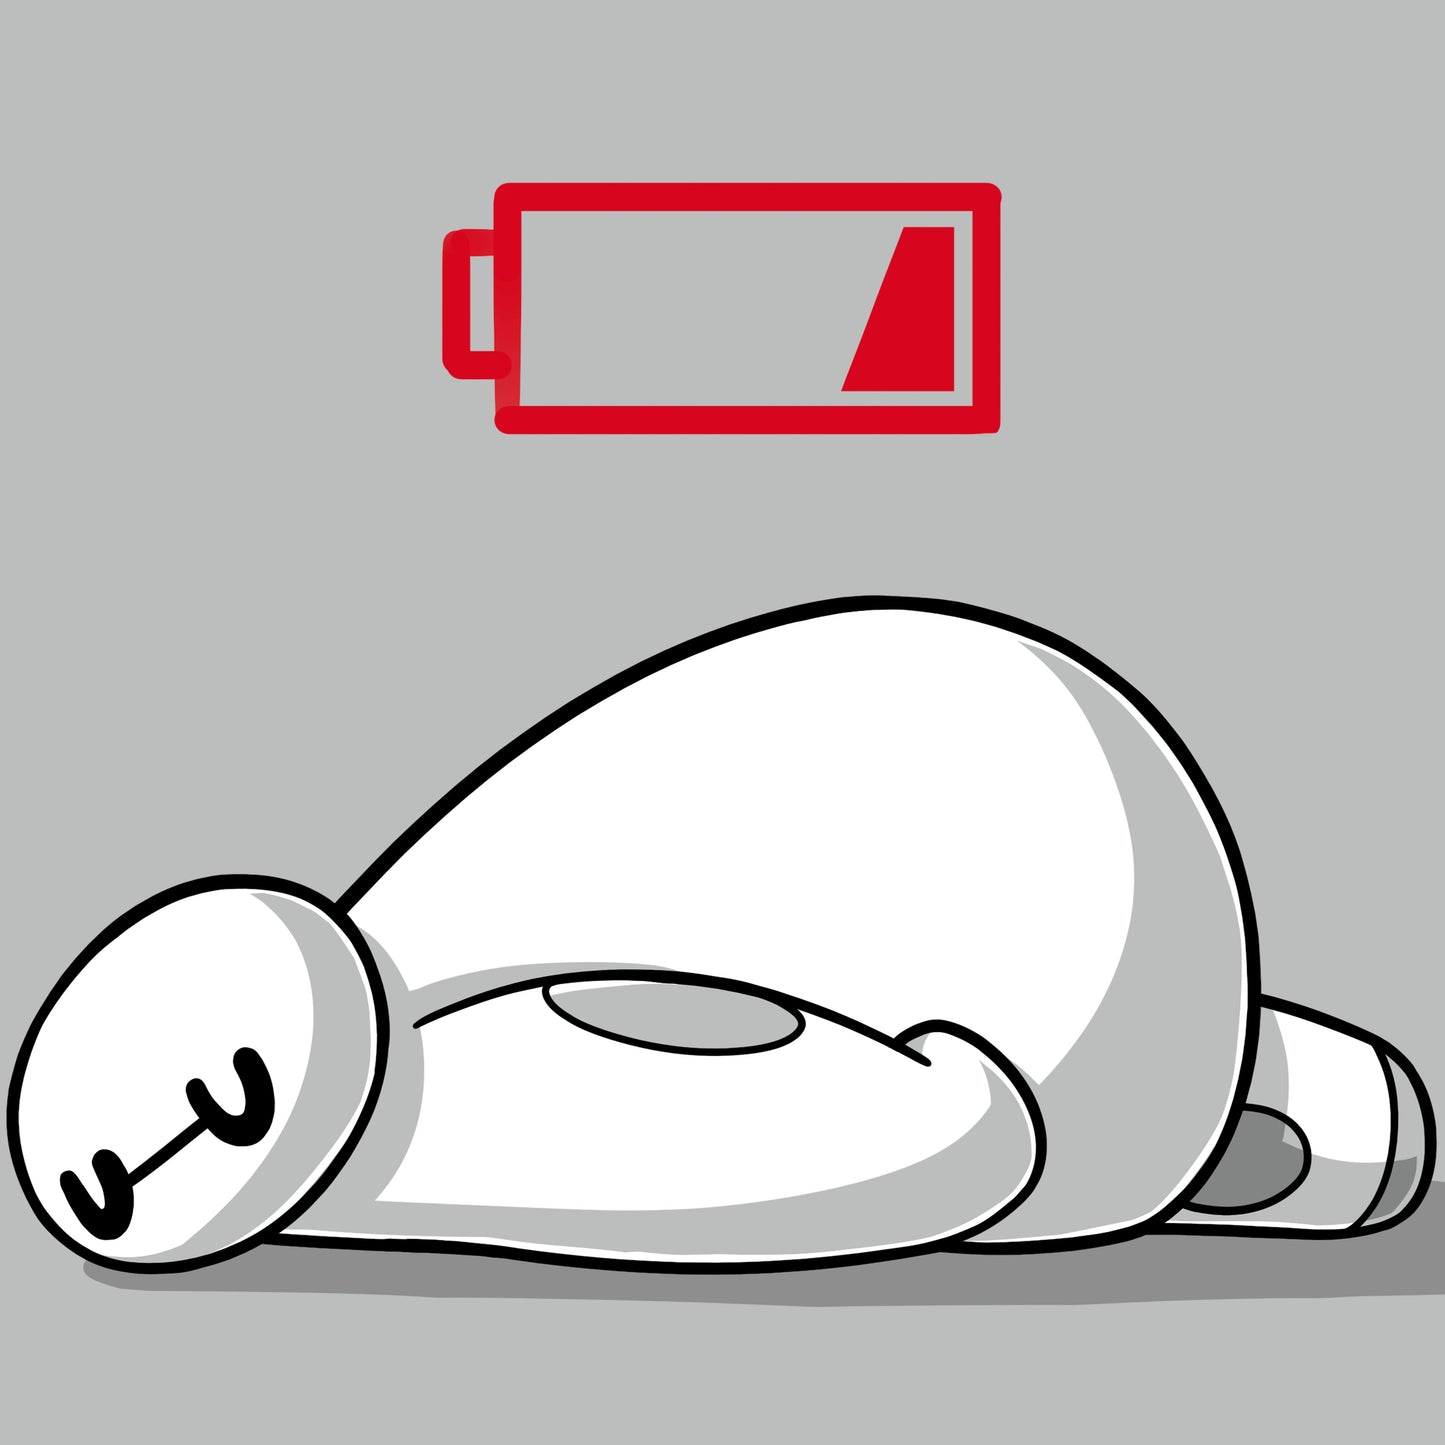 A white teddy bear, resembling Baymax from Disney, laying on the ground with a Low Battery from Disney next to it.